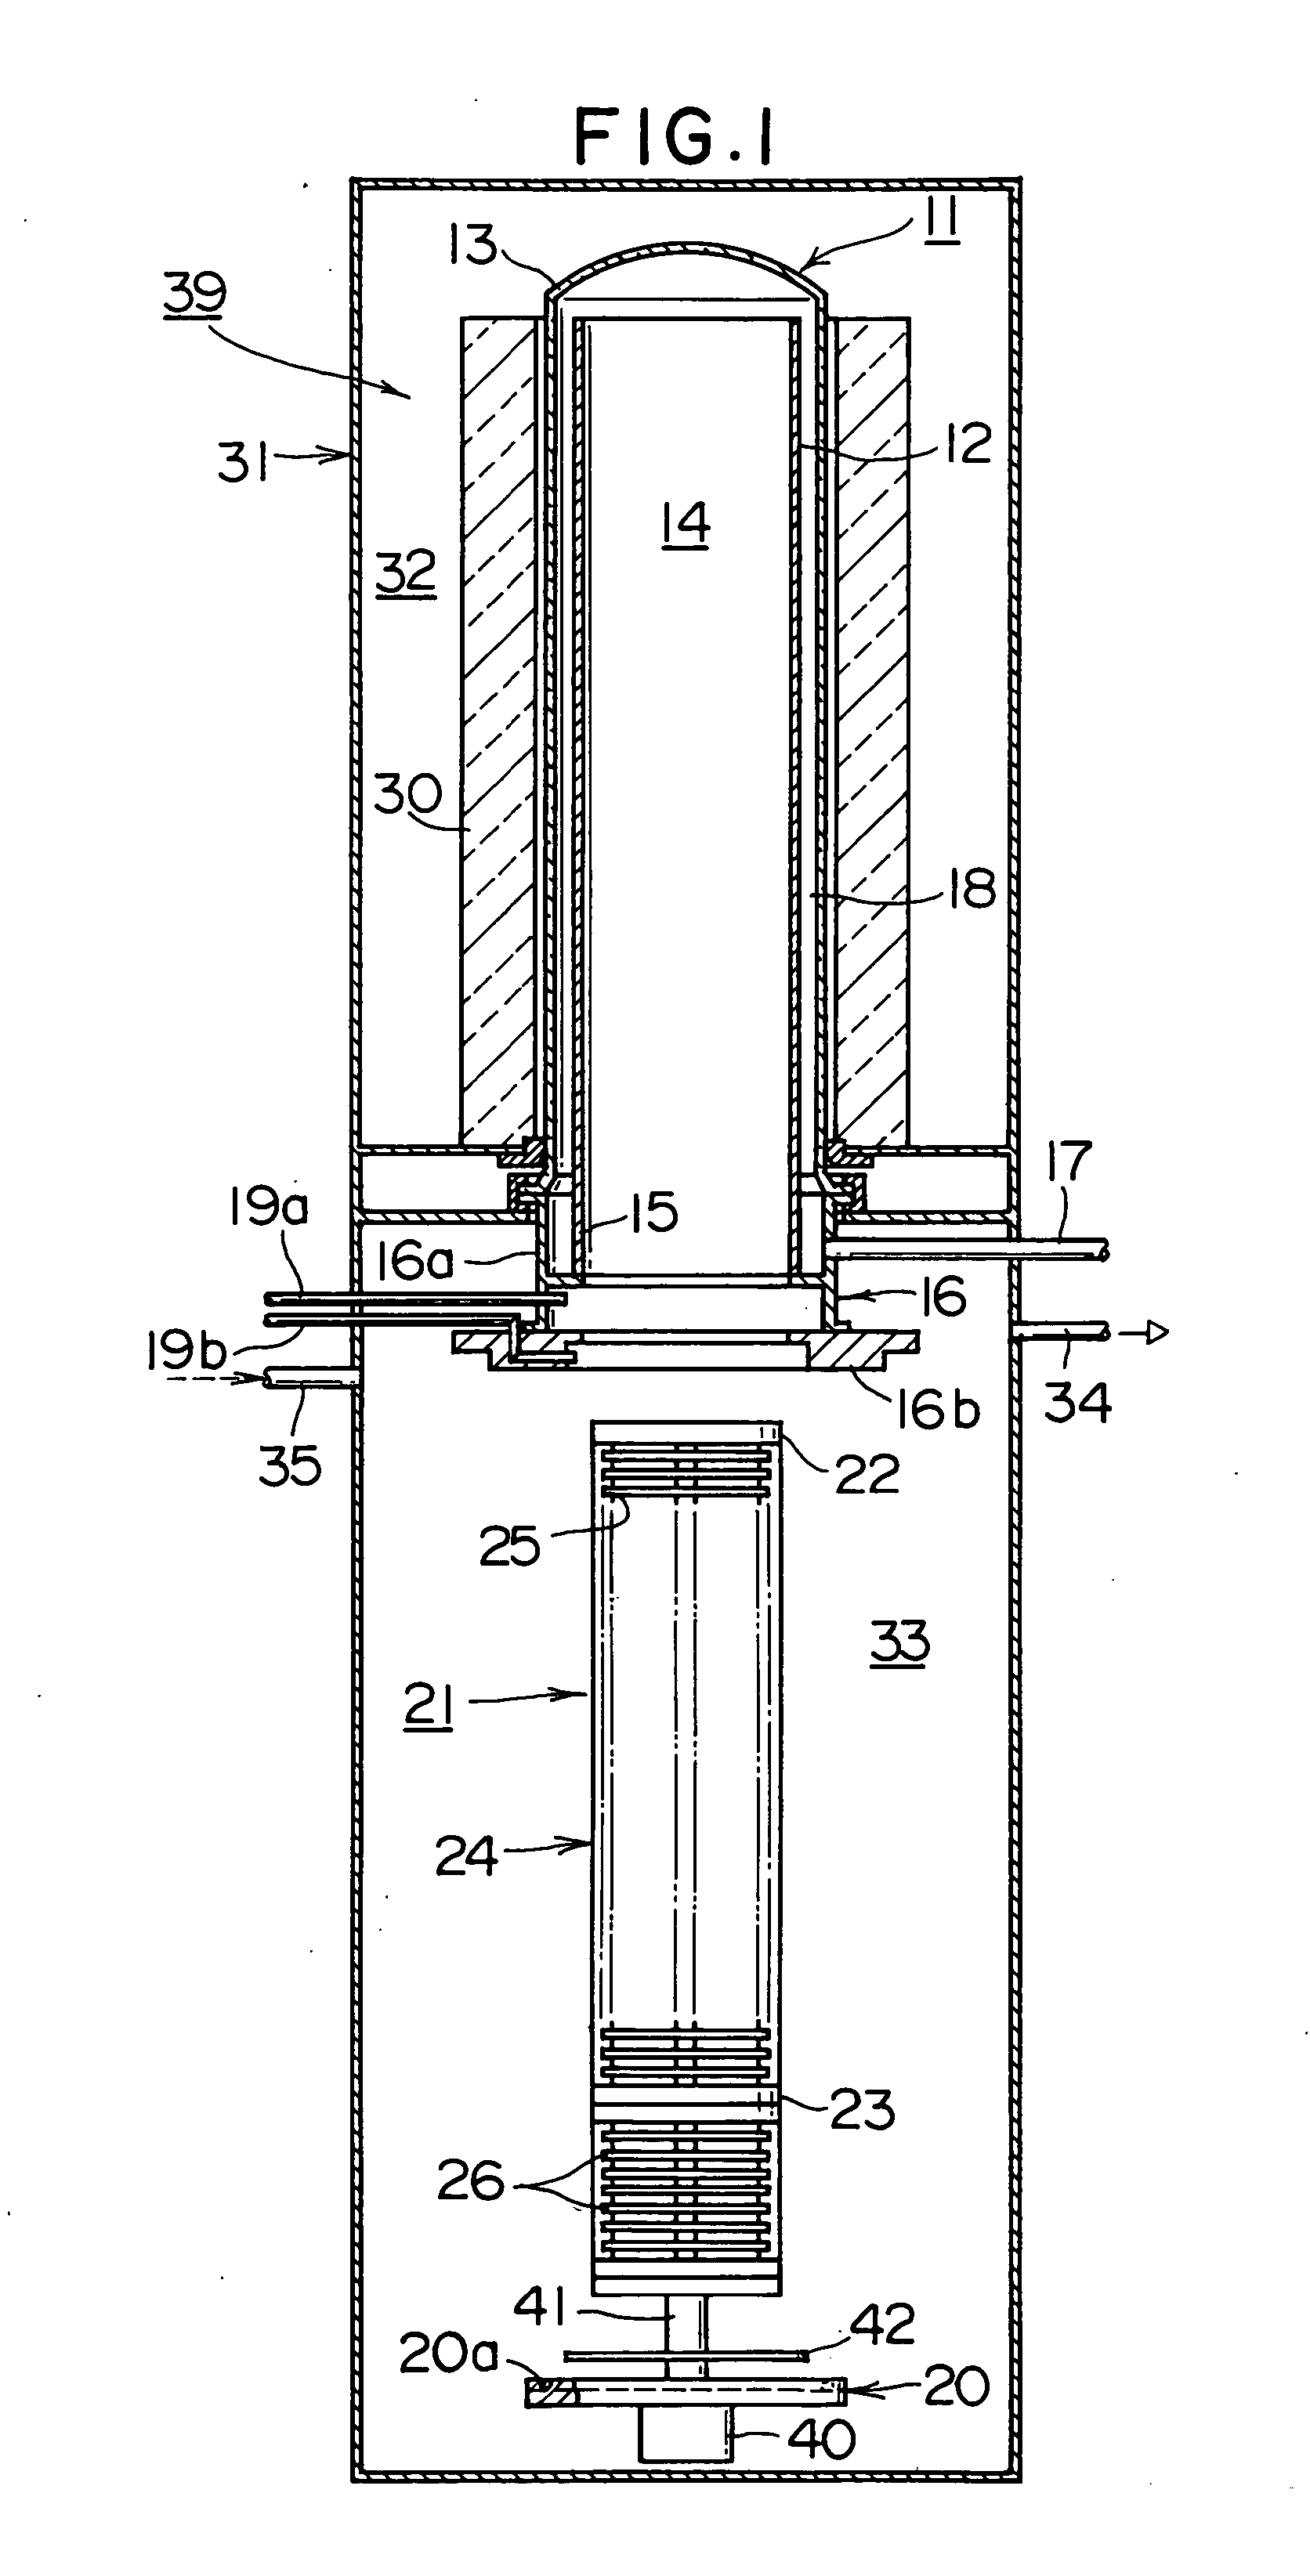 Substrate-processing apparatus and method of producing a semiconductor device